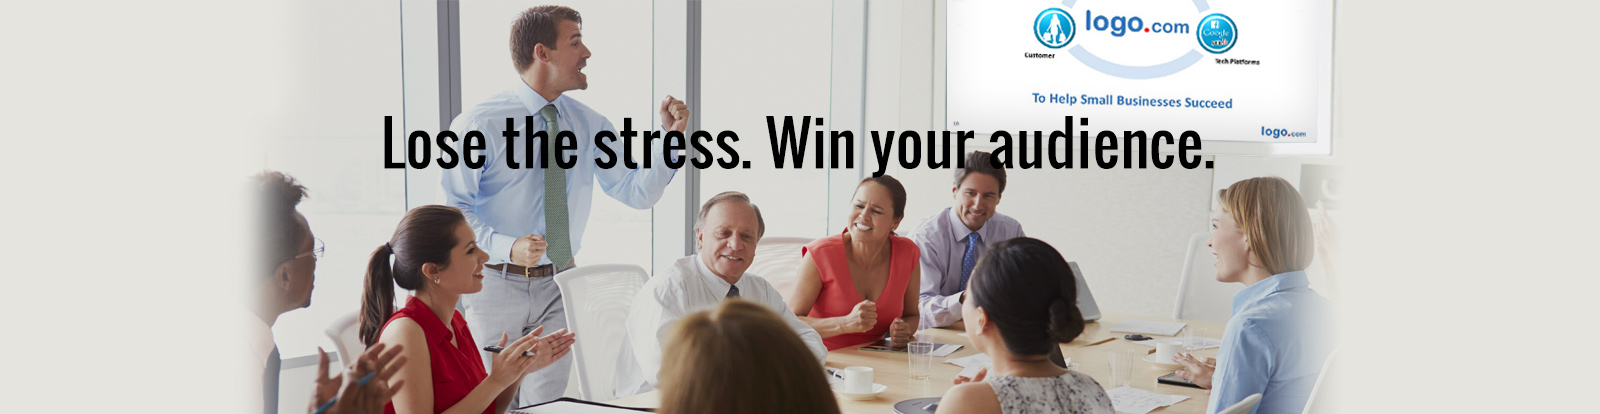 Lose the stress. Win your audience.